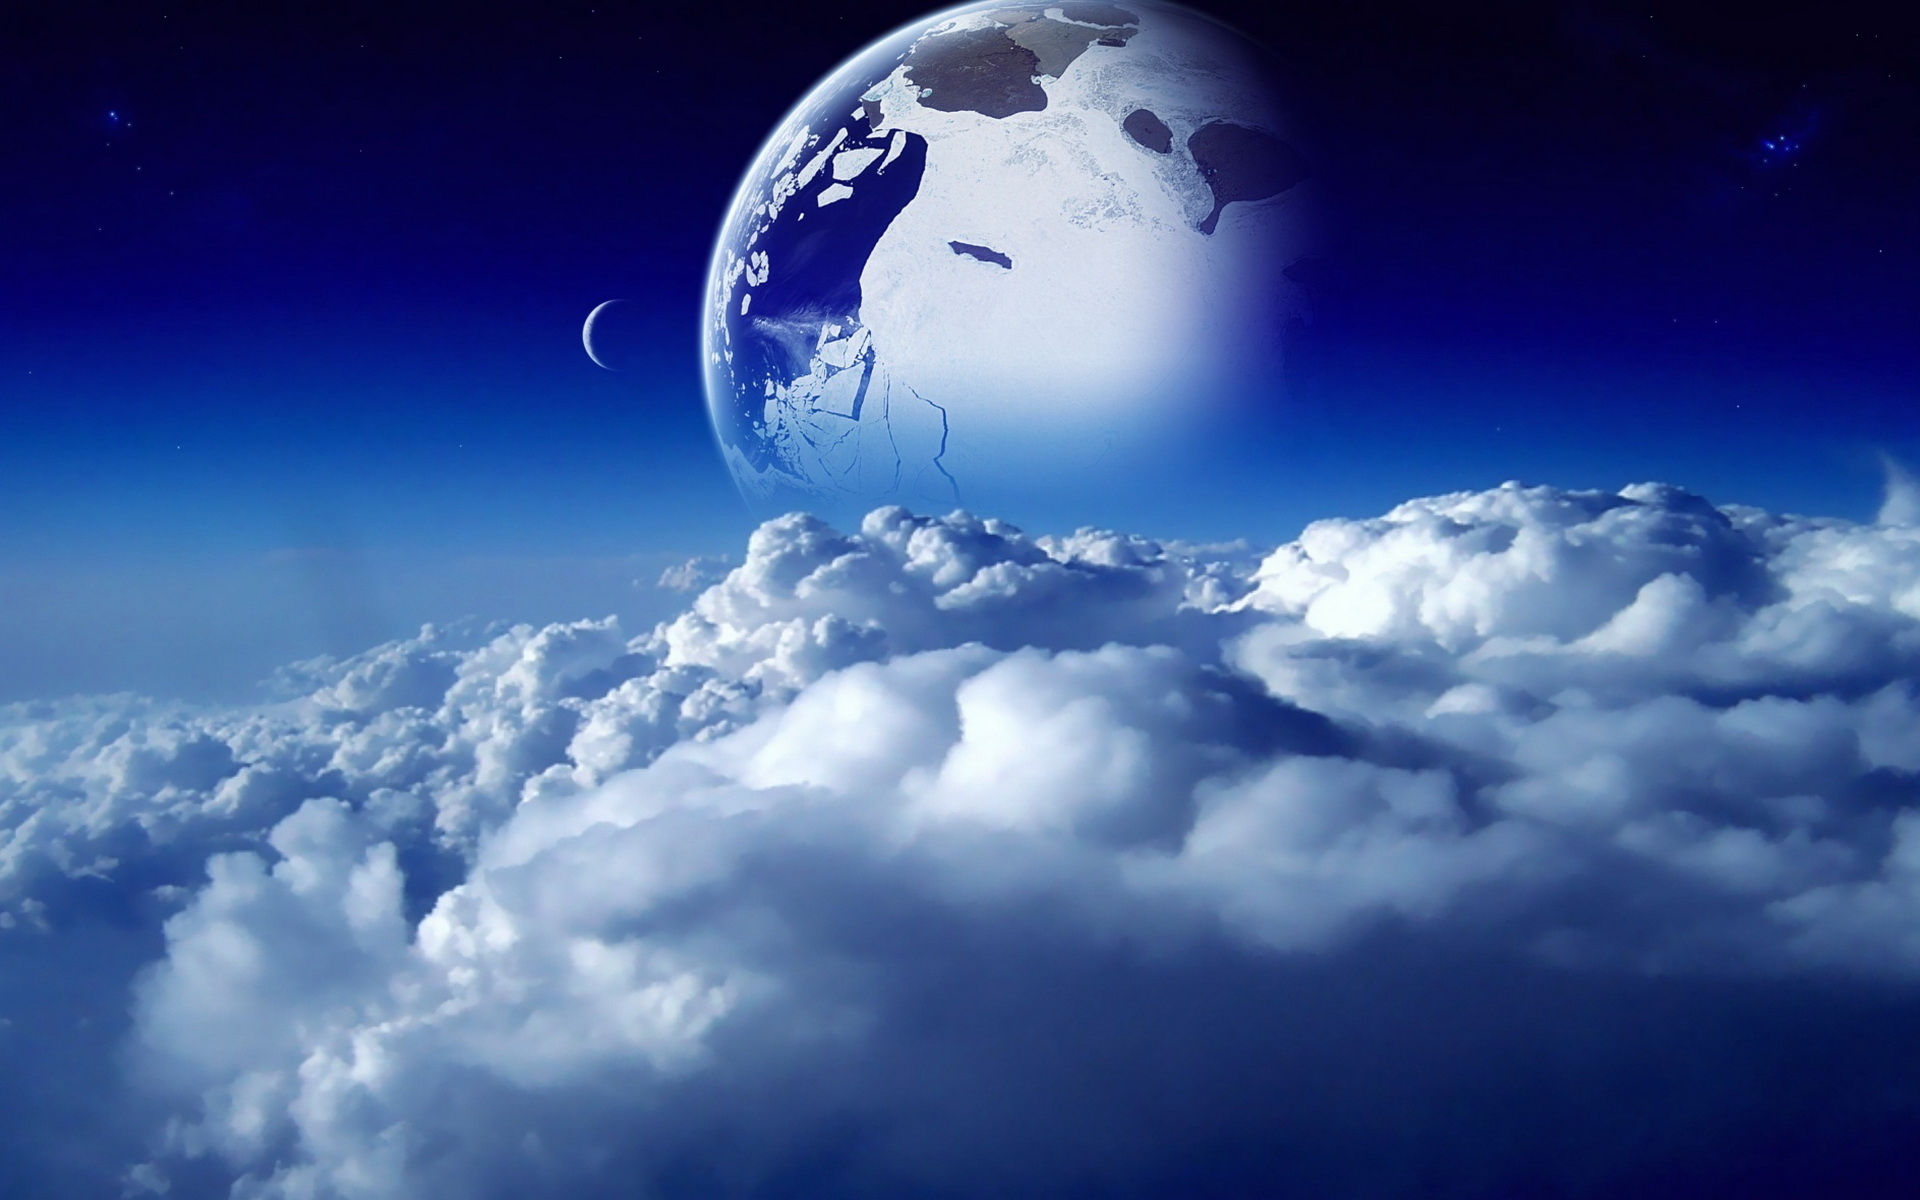 Above the Clouds wallpapers and images   wallpapers, pictures, photos  football backgrounds for photoshop